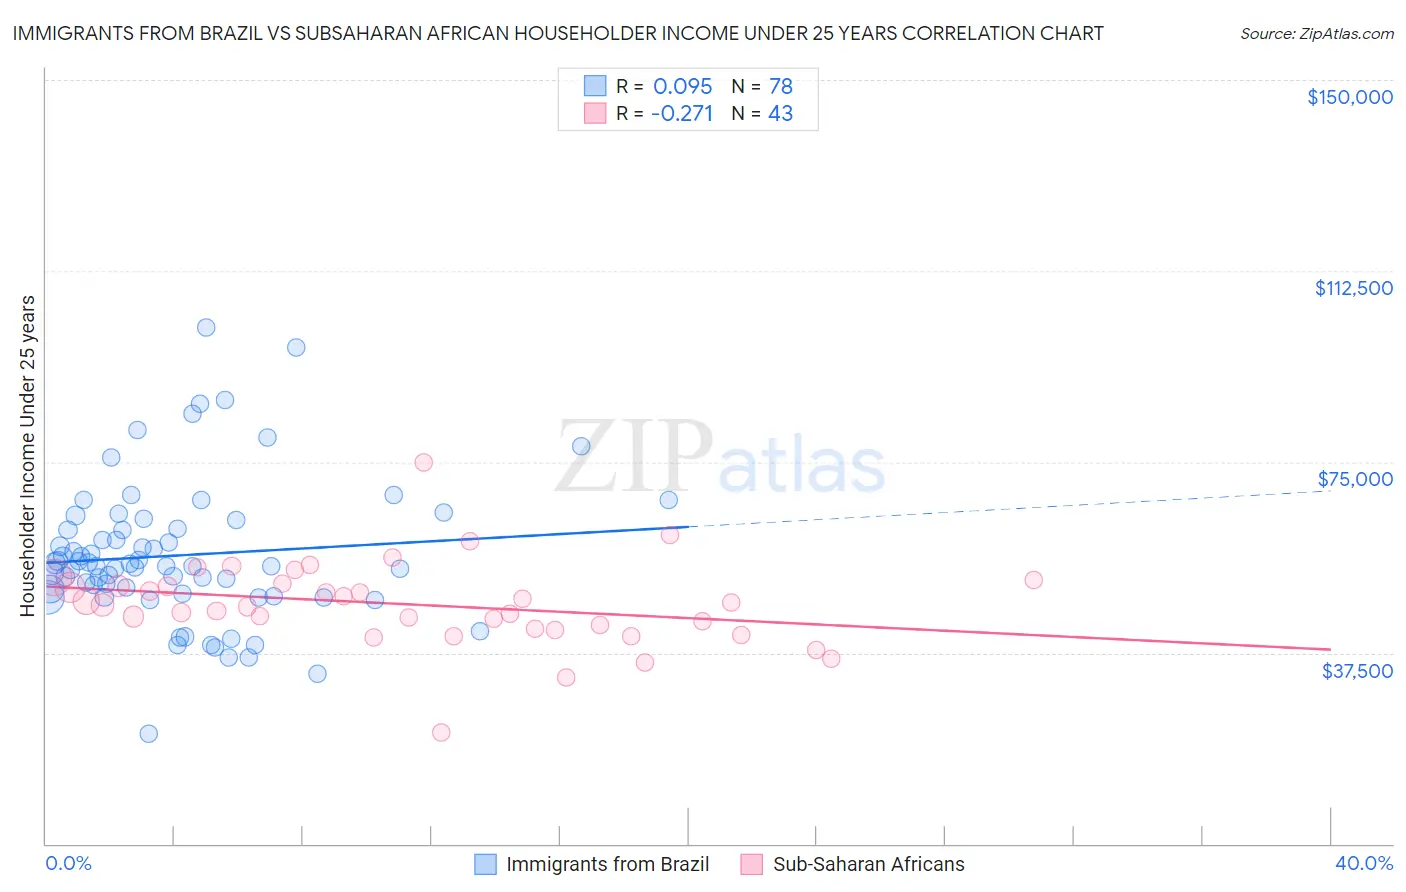 Immigrants from Brazil vs Subsaharan African Householder Income Under 25 years